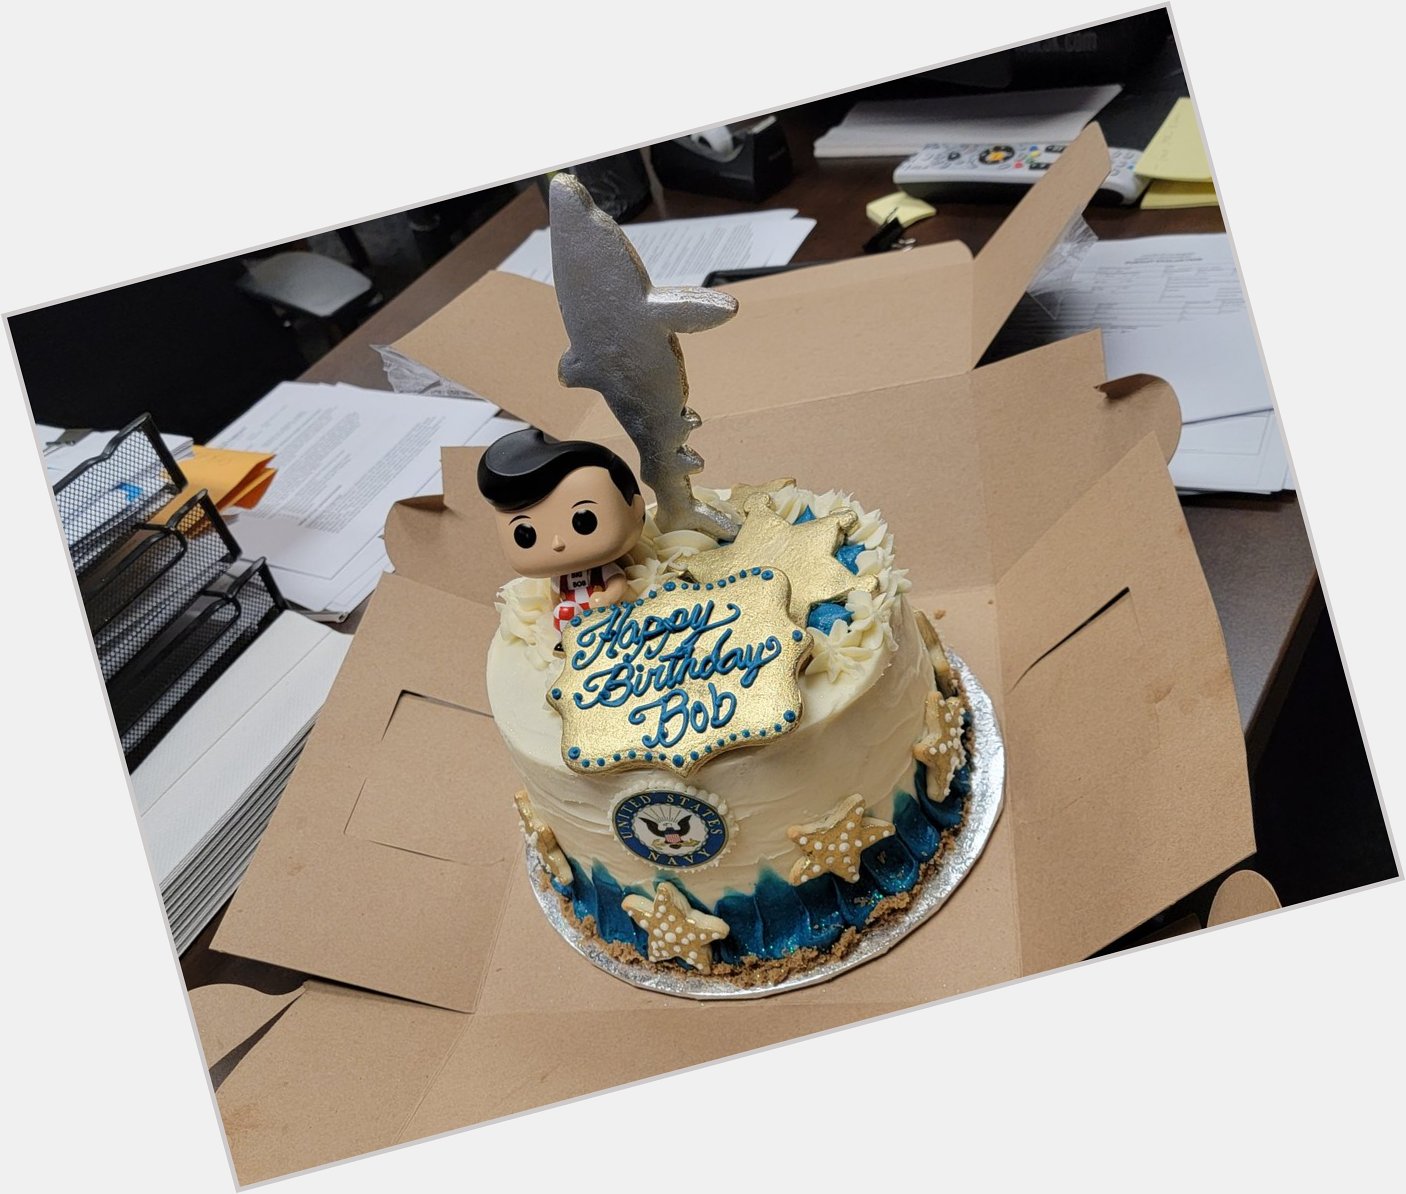  Happy Birthday Erin!! Mine is tomorrow! Here\s the cake my boss surprised me with yesterday: 